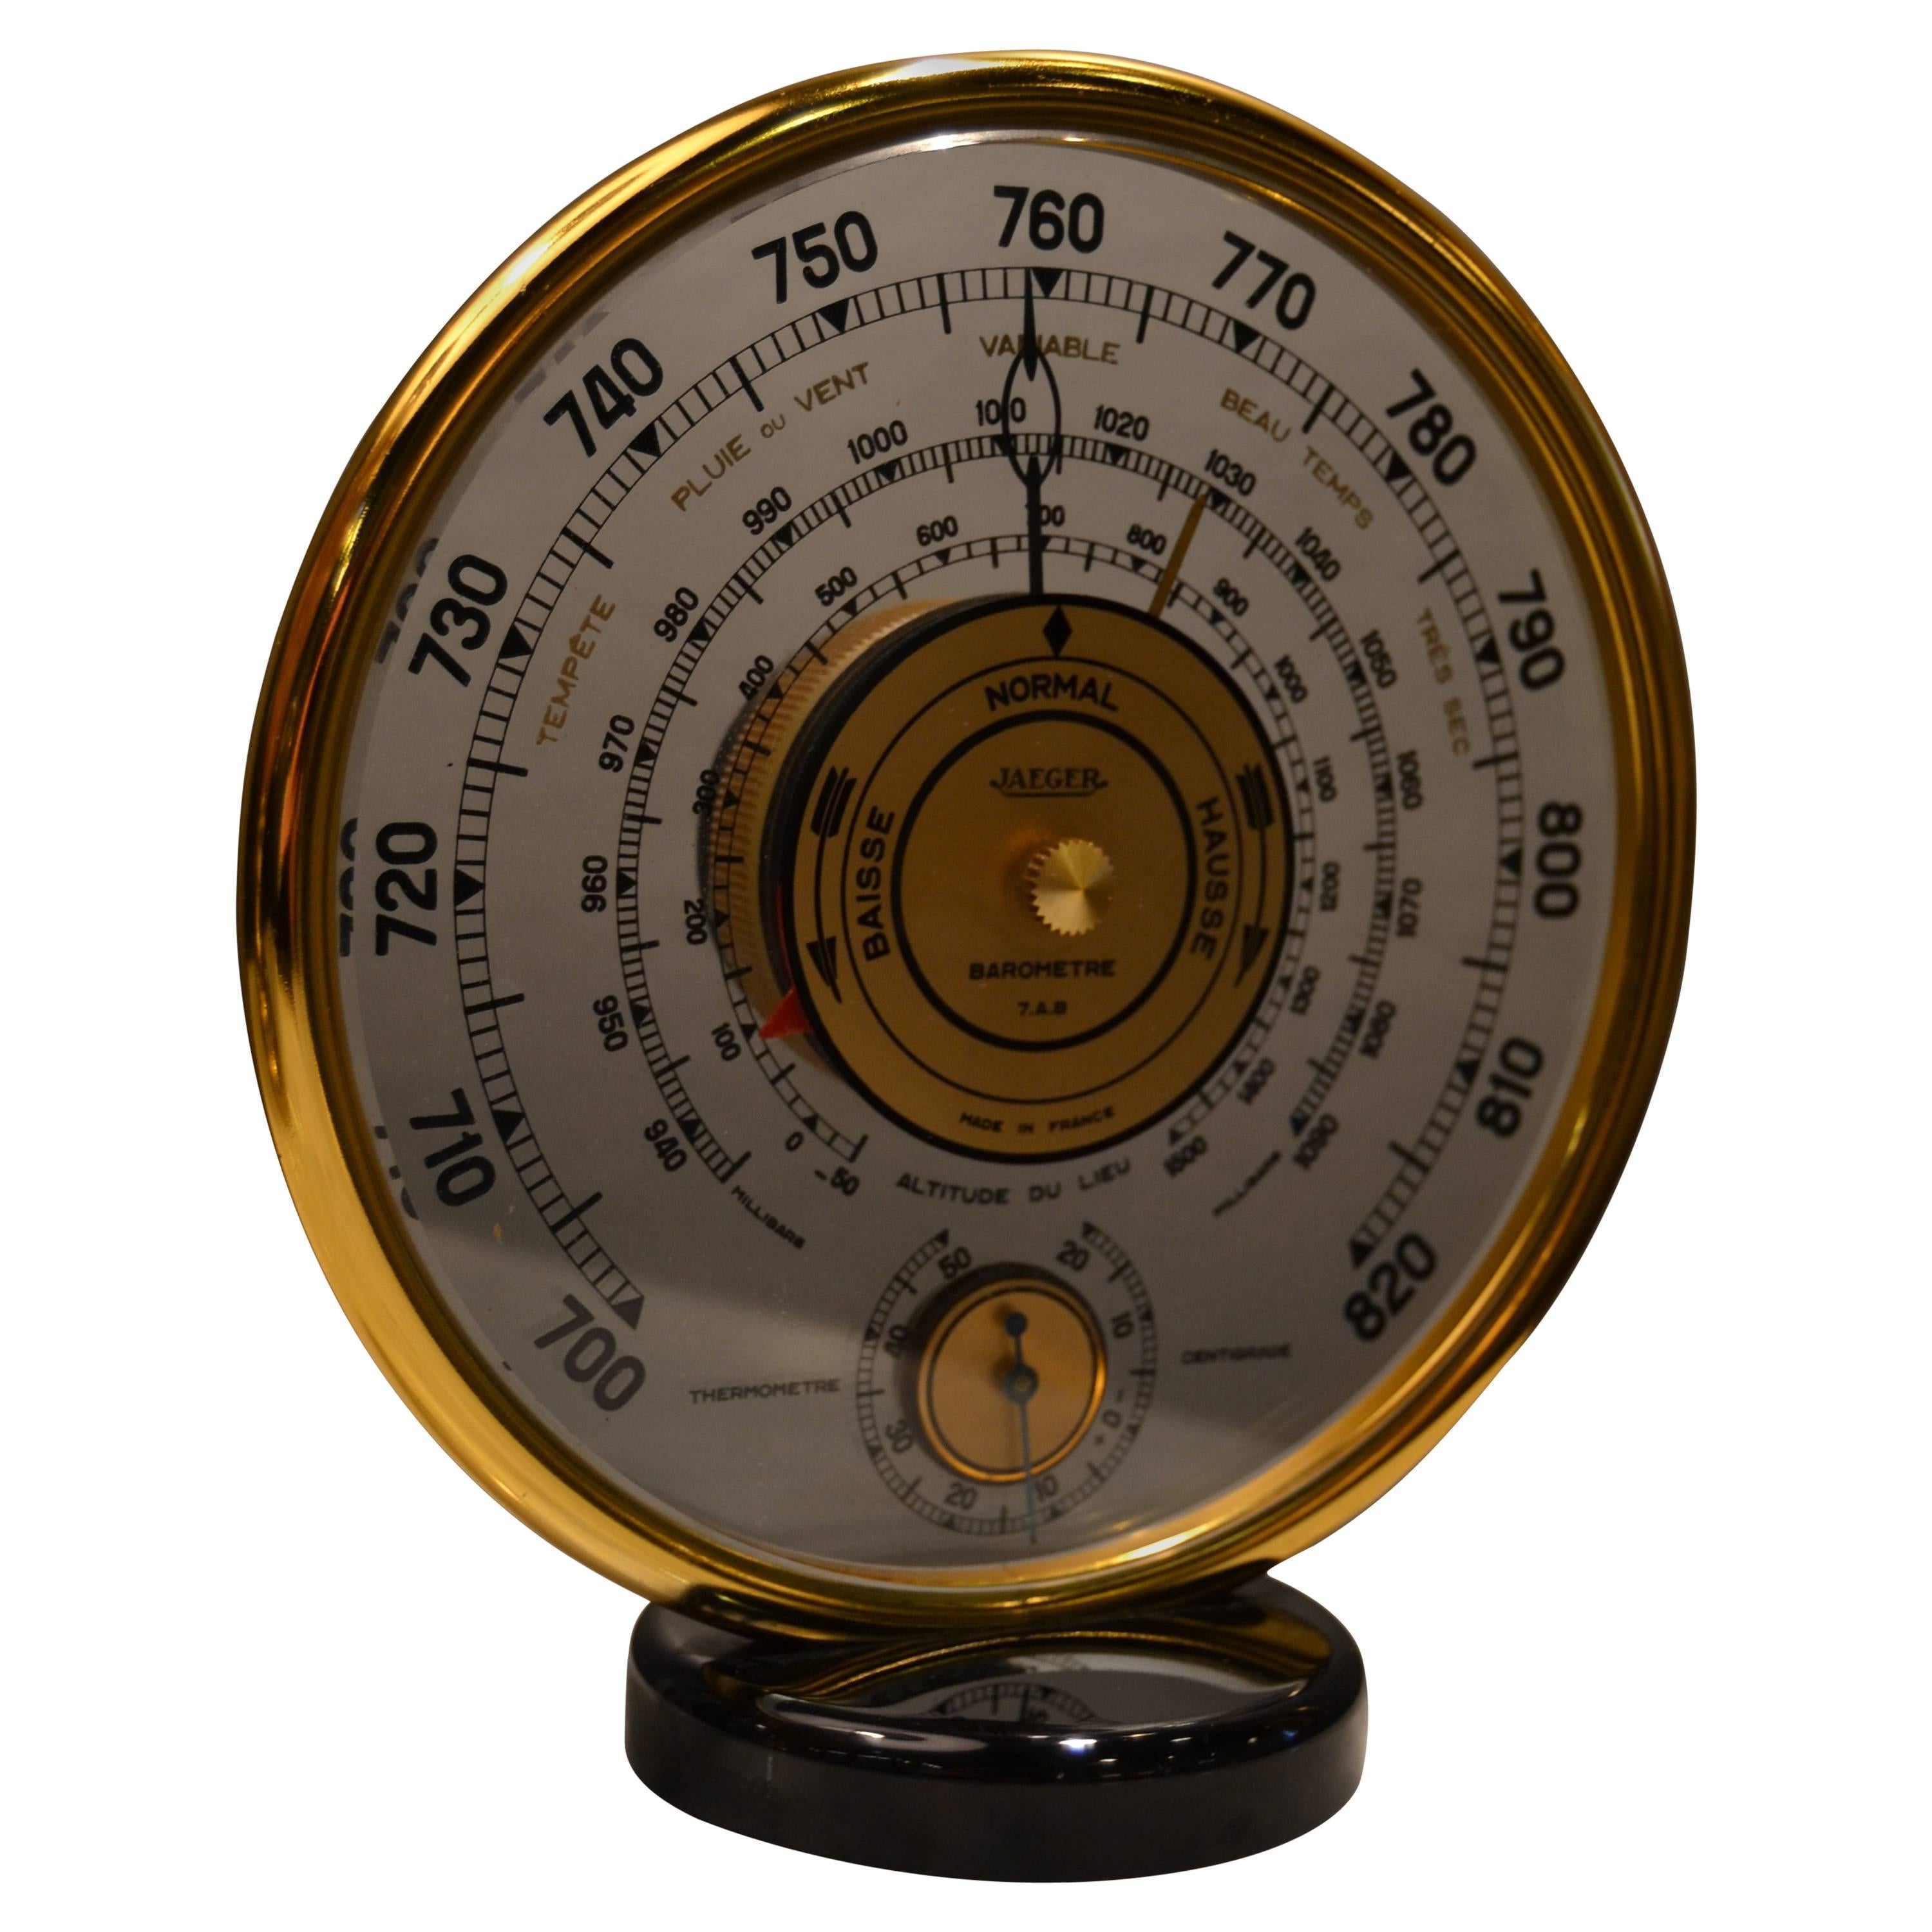 1940s Jaeger Desk Top Barometer and Thermometer